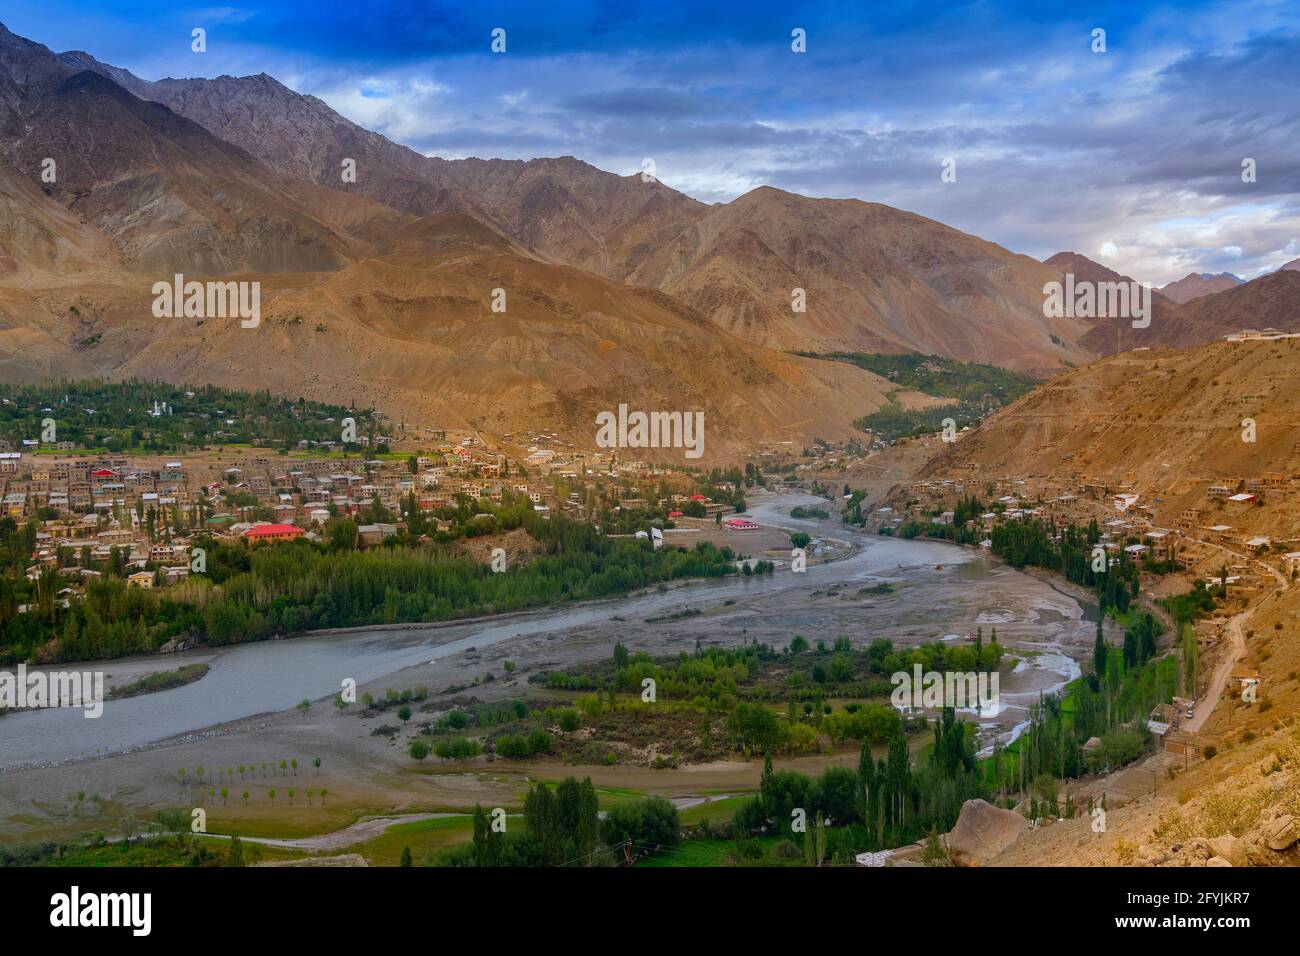 Indus river turns around Kargil City valley with Himalayan mountains and blue cloudy sky in background, Leh, Ladakh, Jammu and Kashmir, India Stock Photo